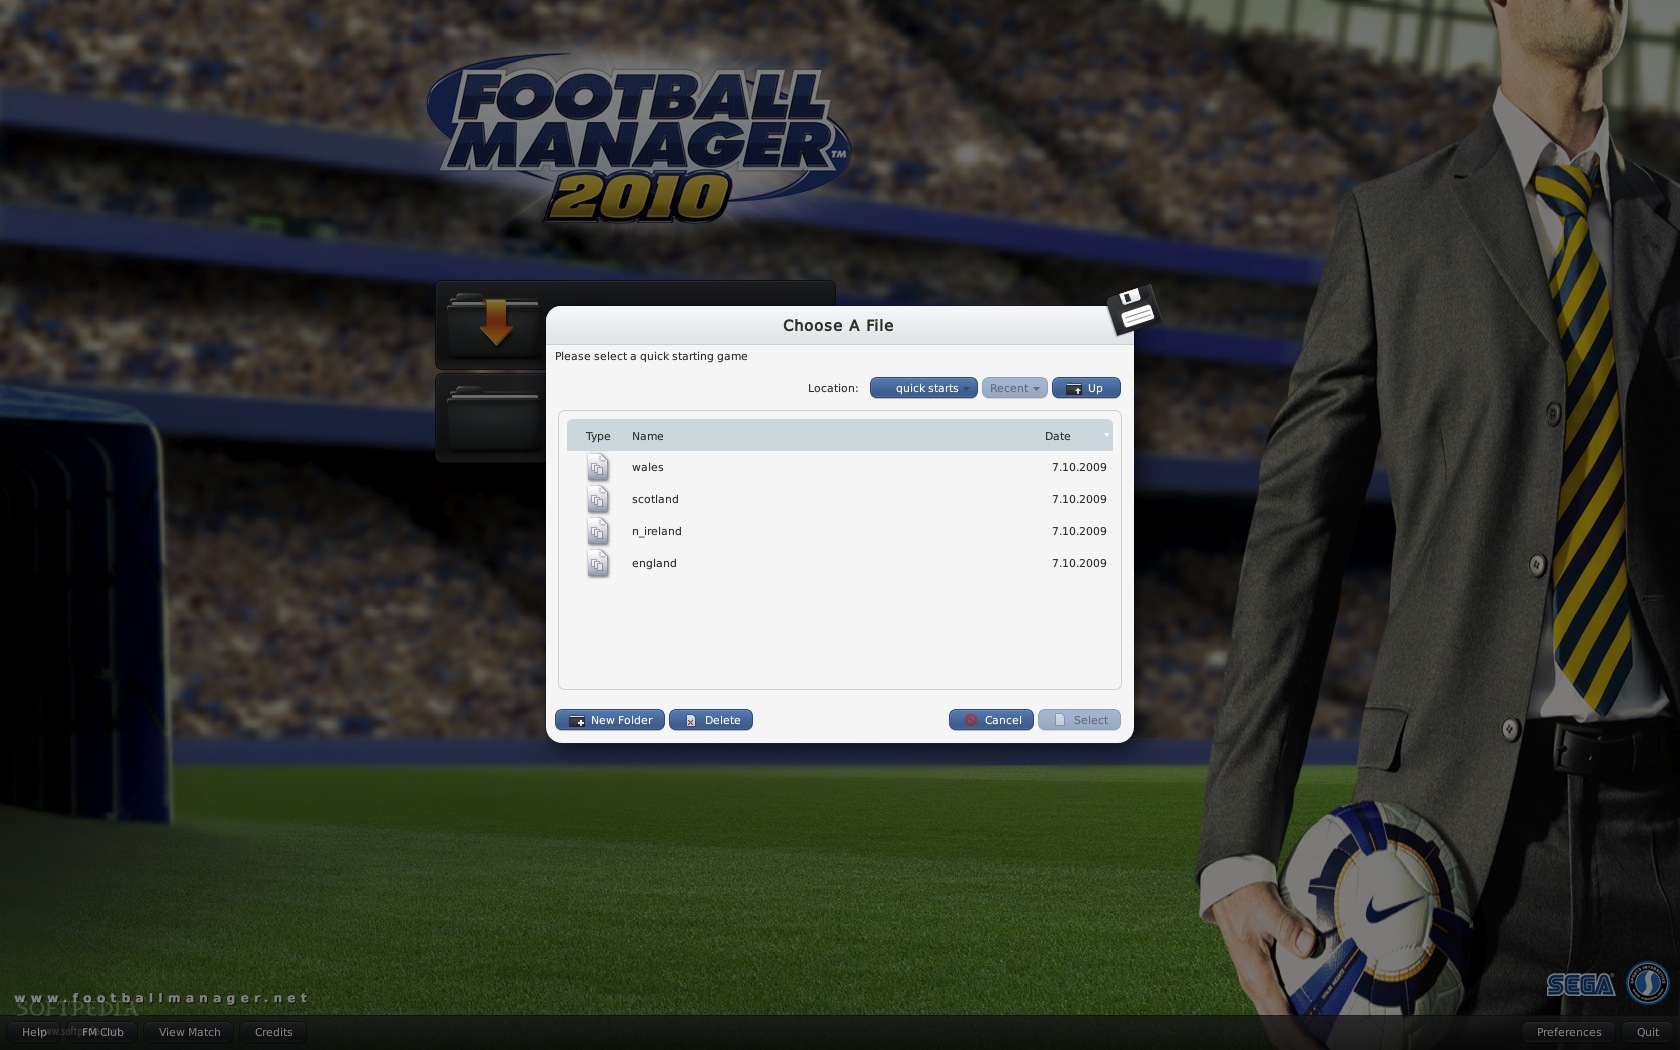 Football manager 2010 new patch 10.4